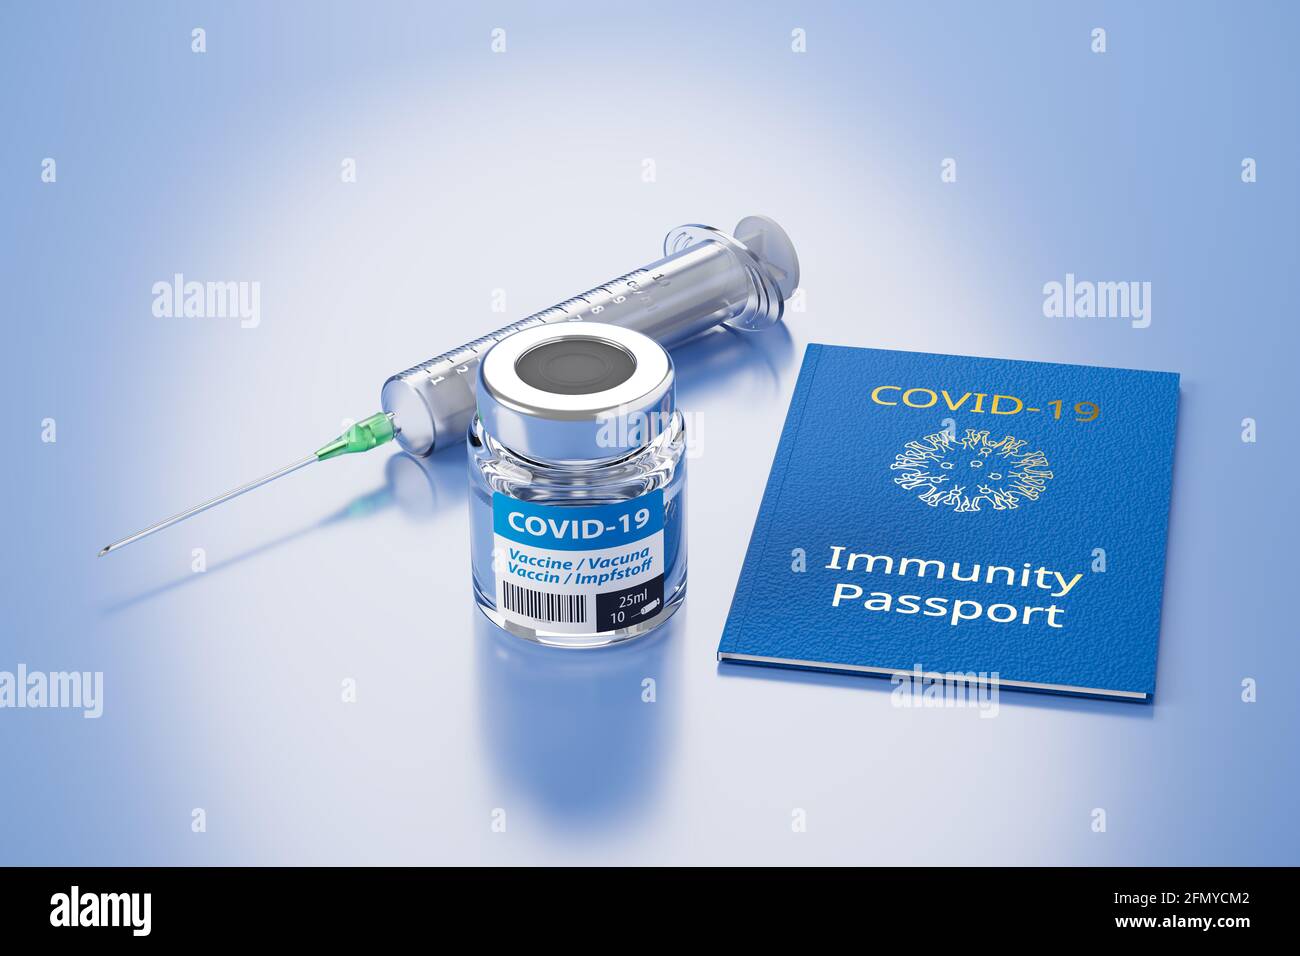 Immunity Passport concept: A vial of Covid-19 vaccine, a syringe and an immunity passport mockup on a blue surface. Stock Photo